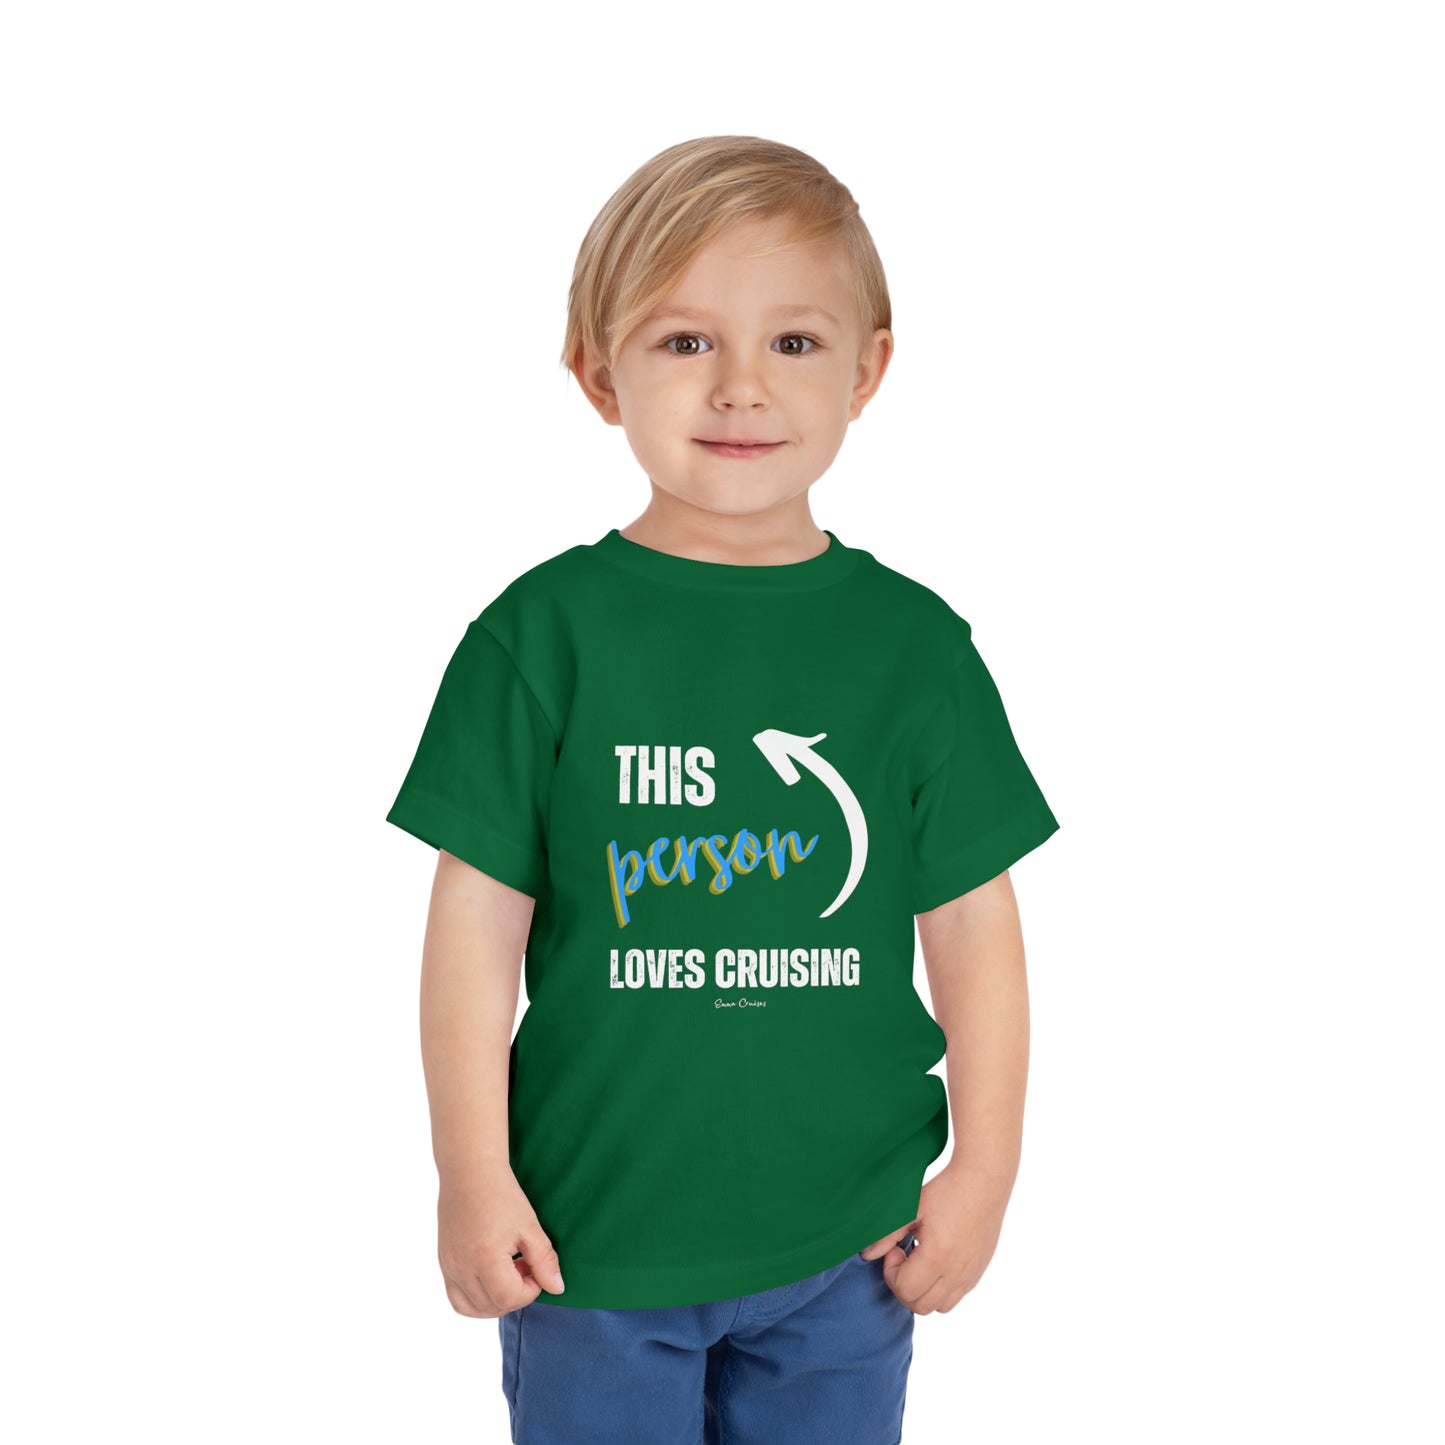 This Person Loves Cruising - Toddler UNISEX T-Shirt